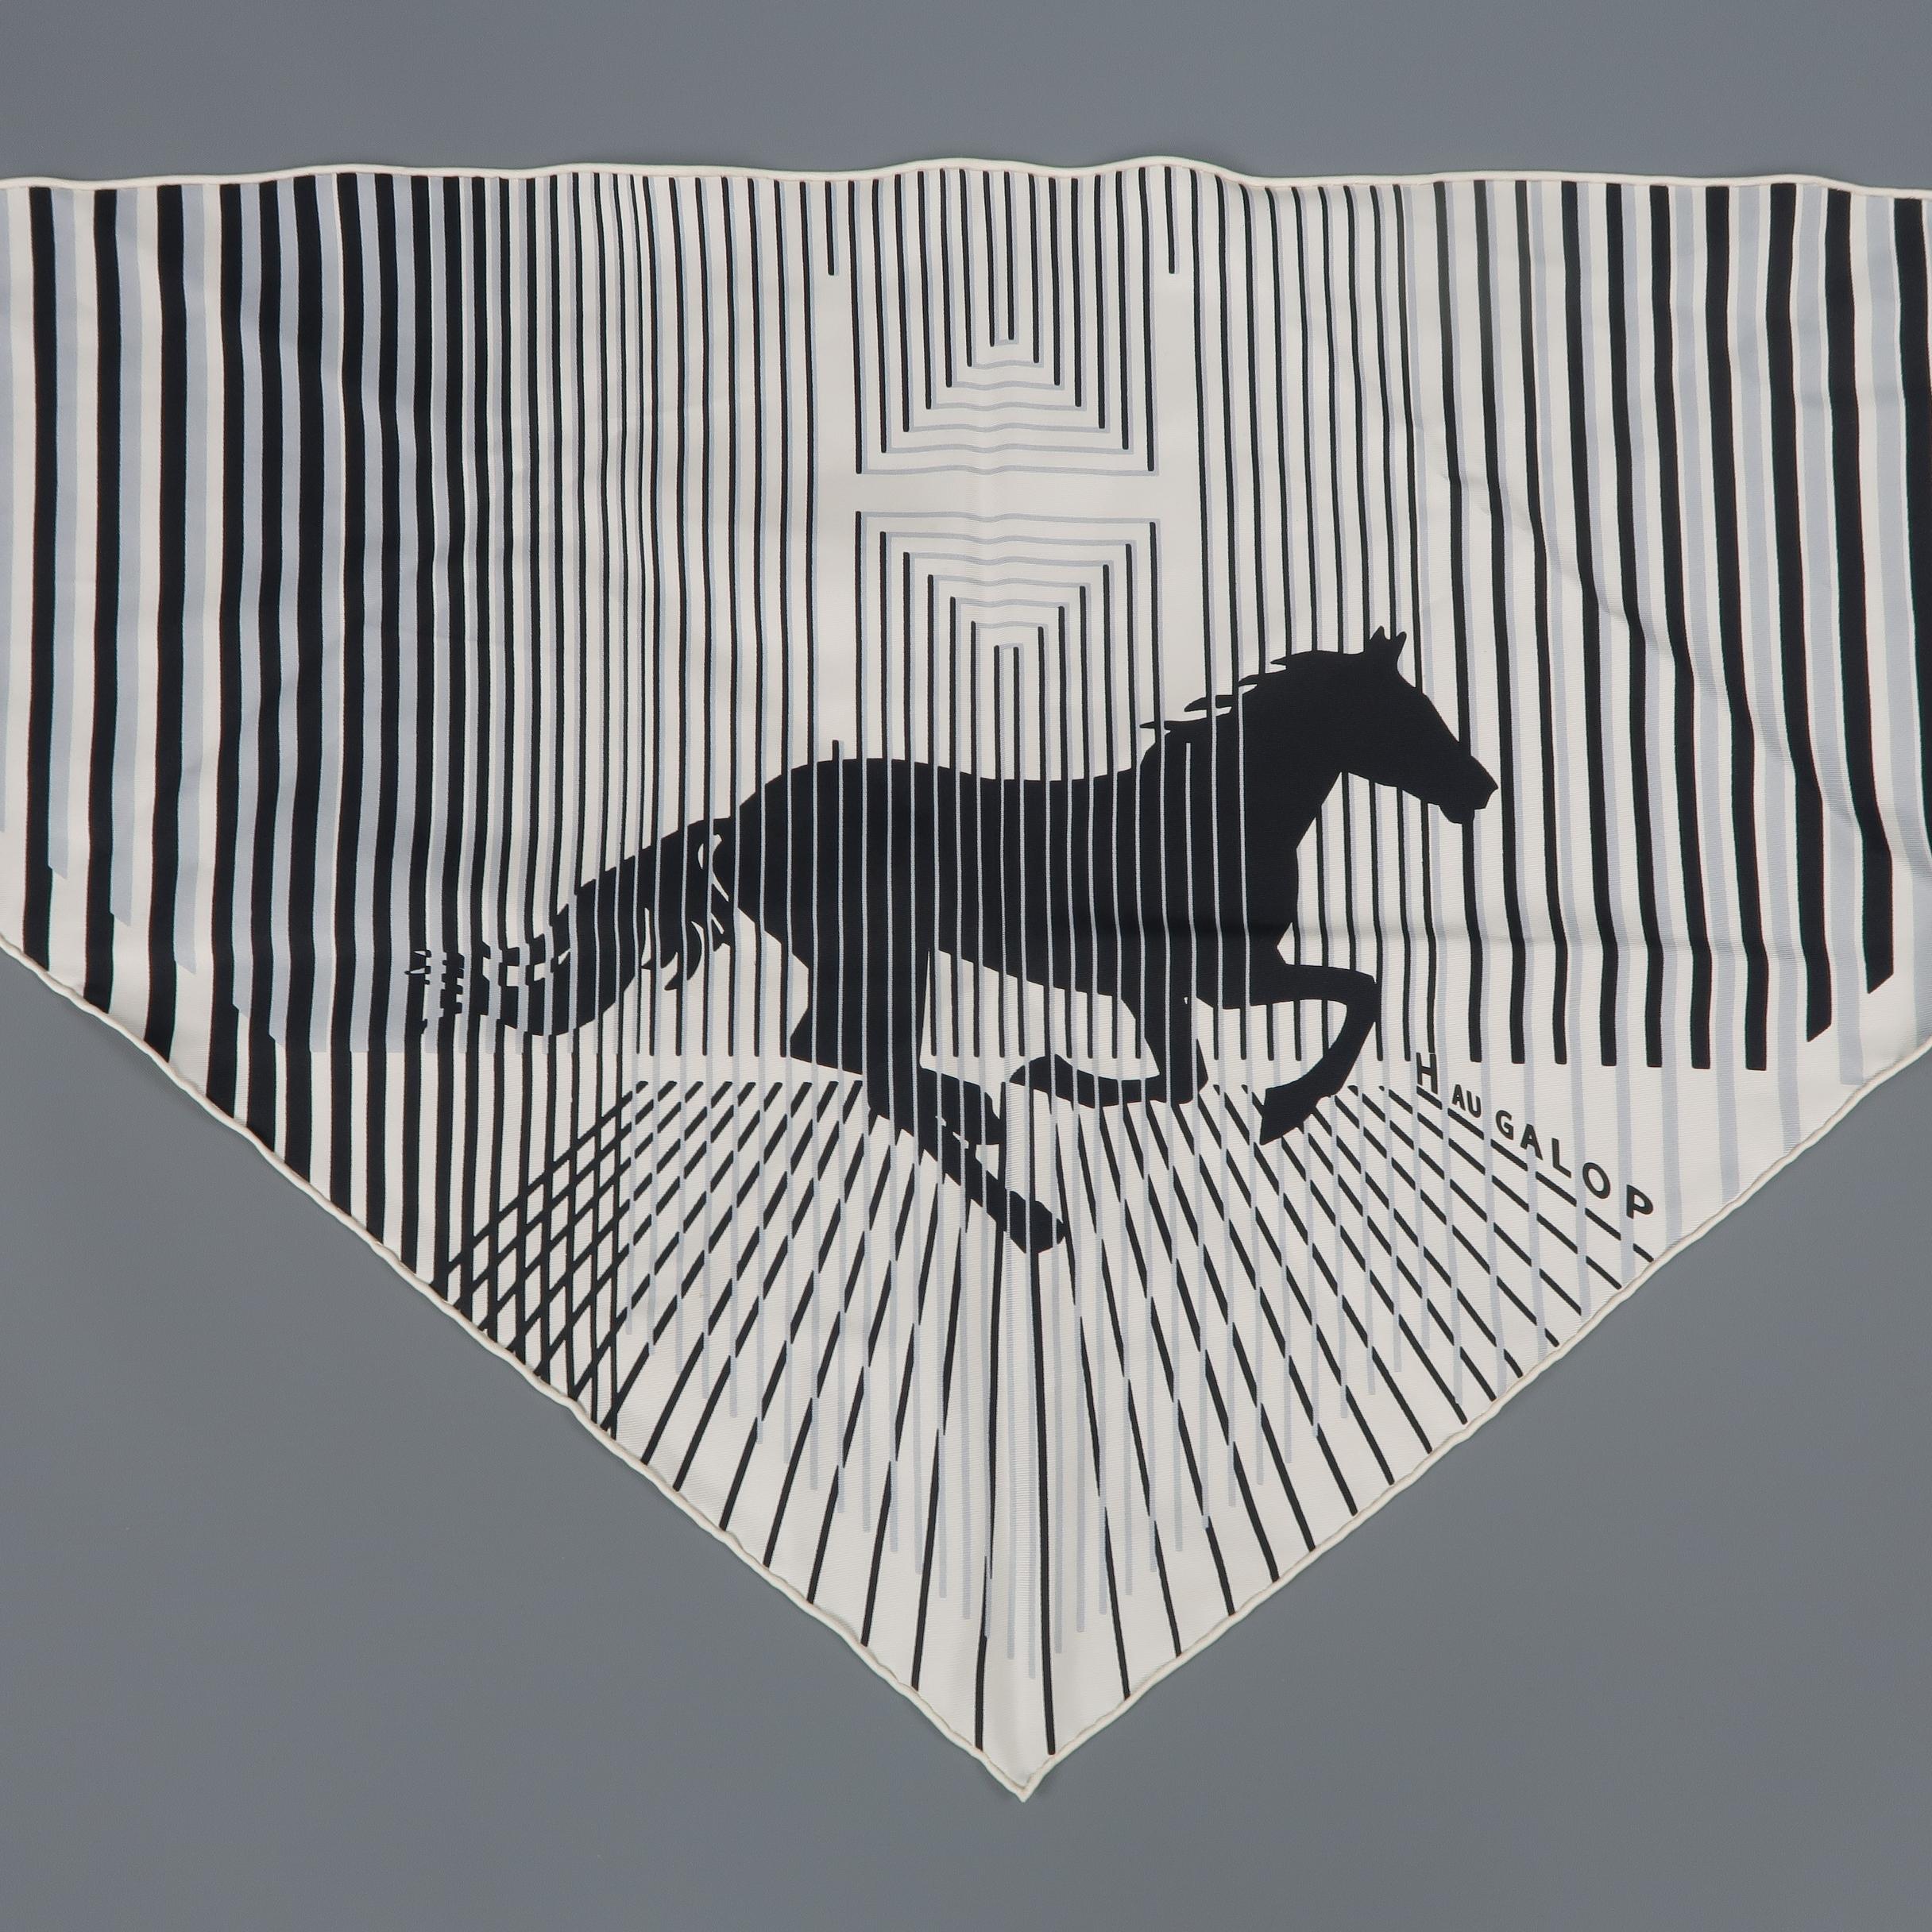 black and white hermes scarf